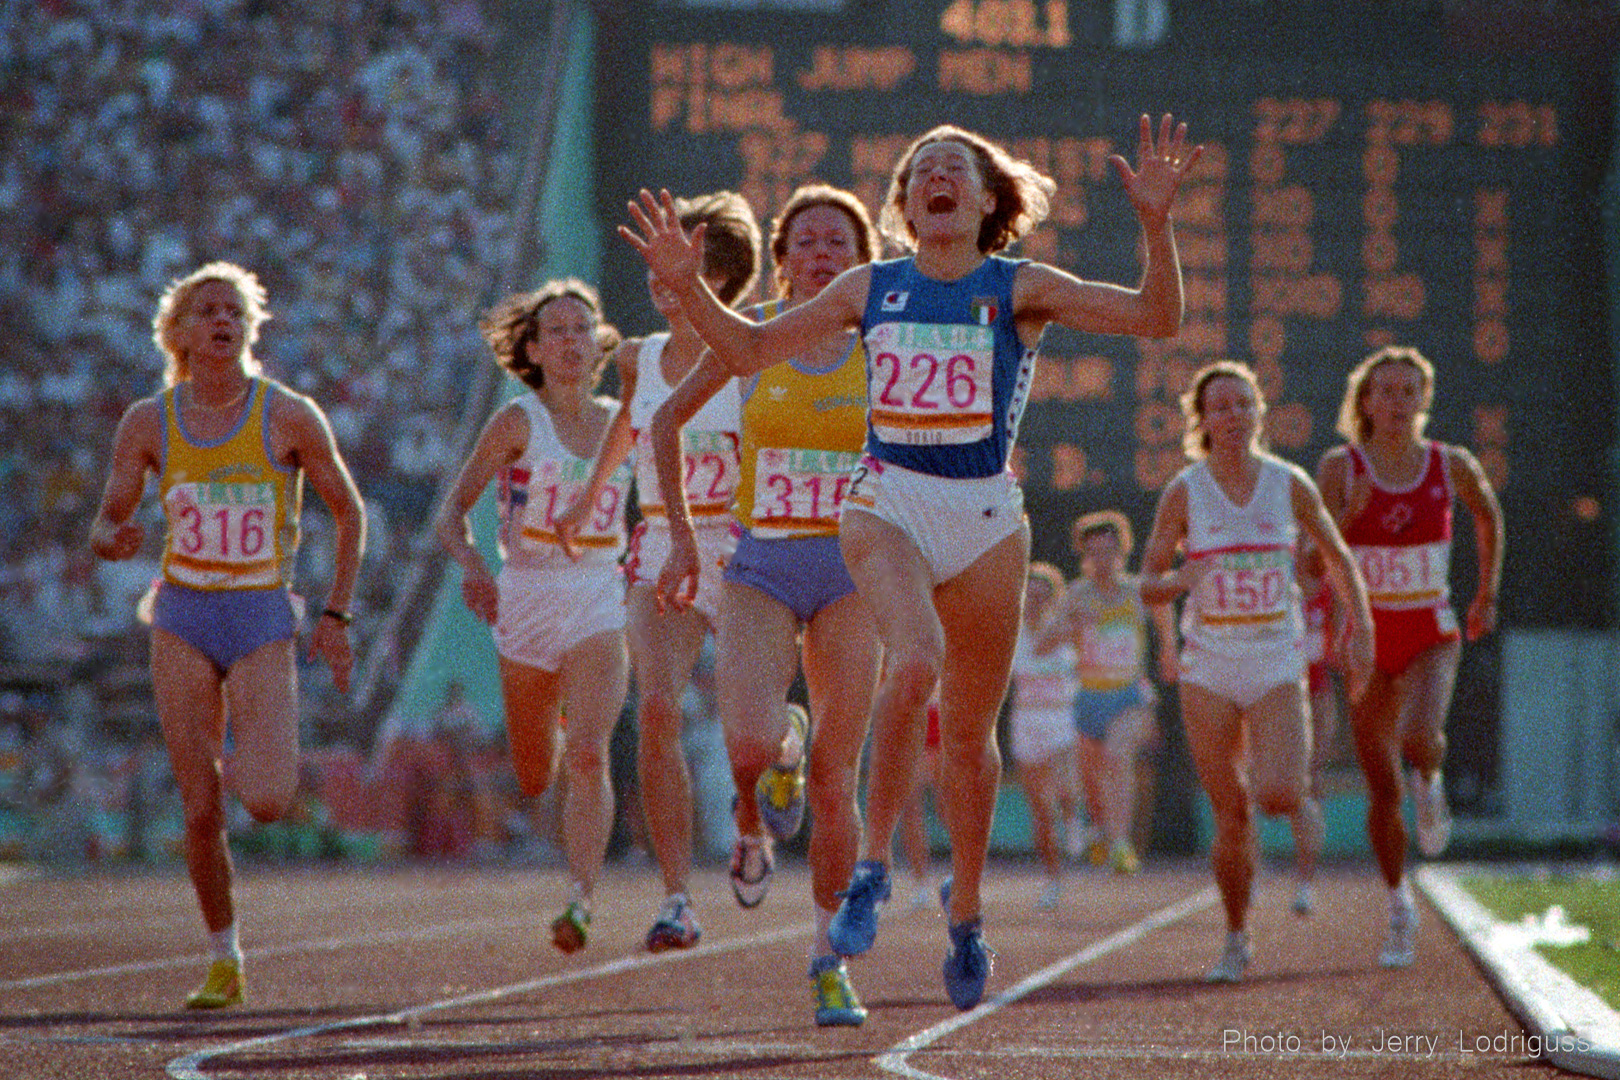 Maricica Puica (226) of Romania reacts to winning the women's 3,000 meters  in an Olympic record time of 8:35.96 after Mary Decker fell out of the race after a trip up with Zola Budd.